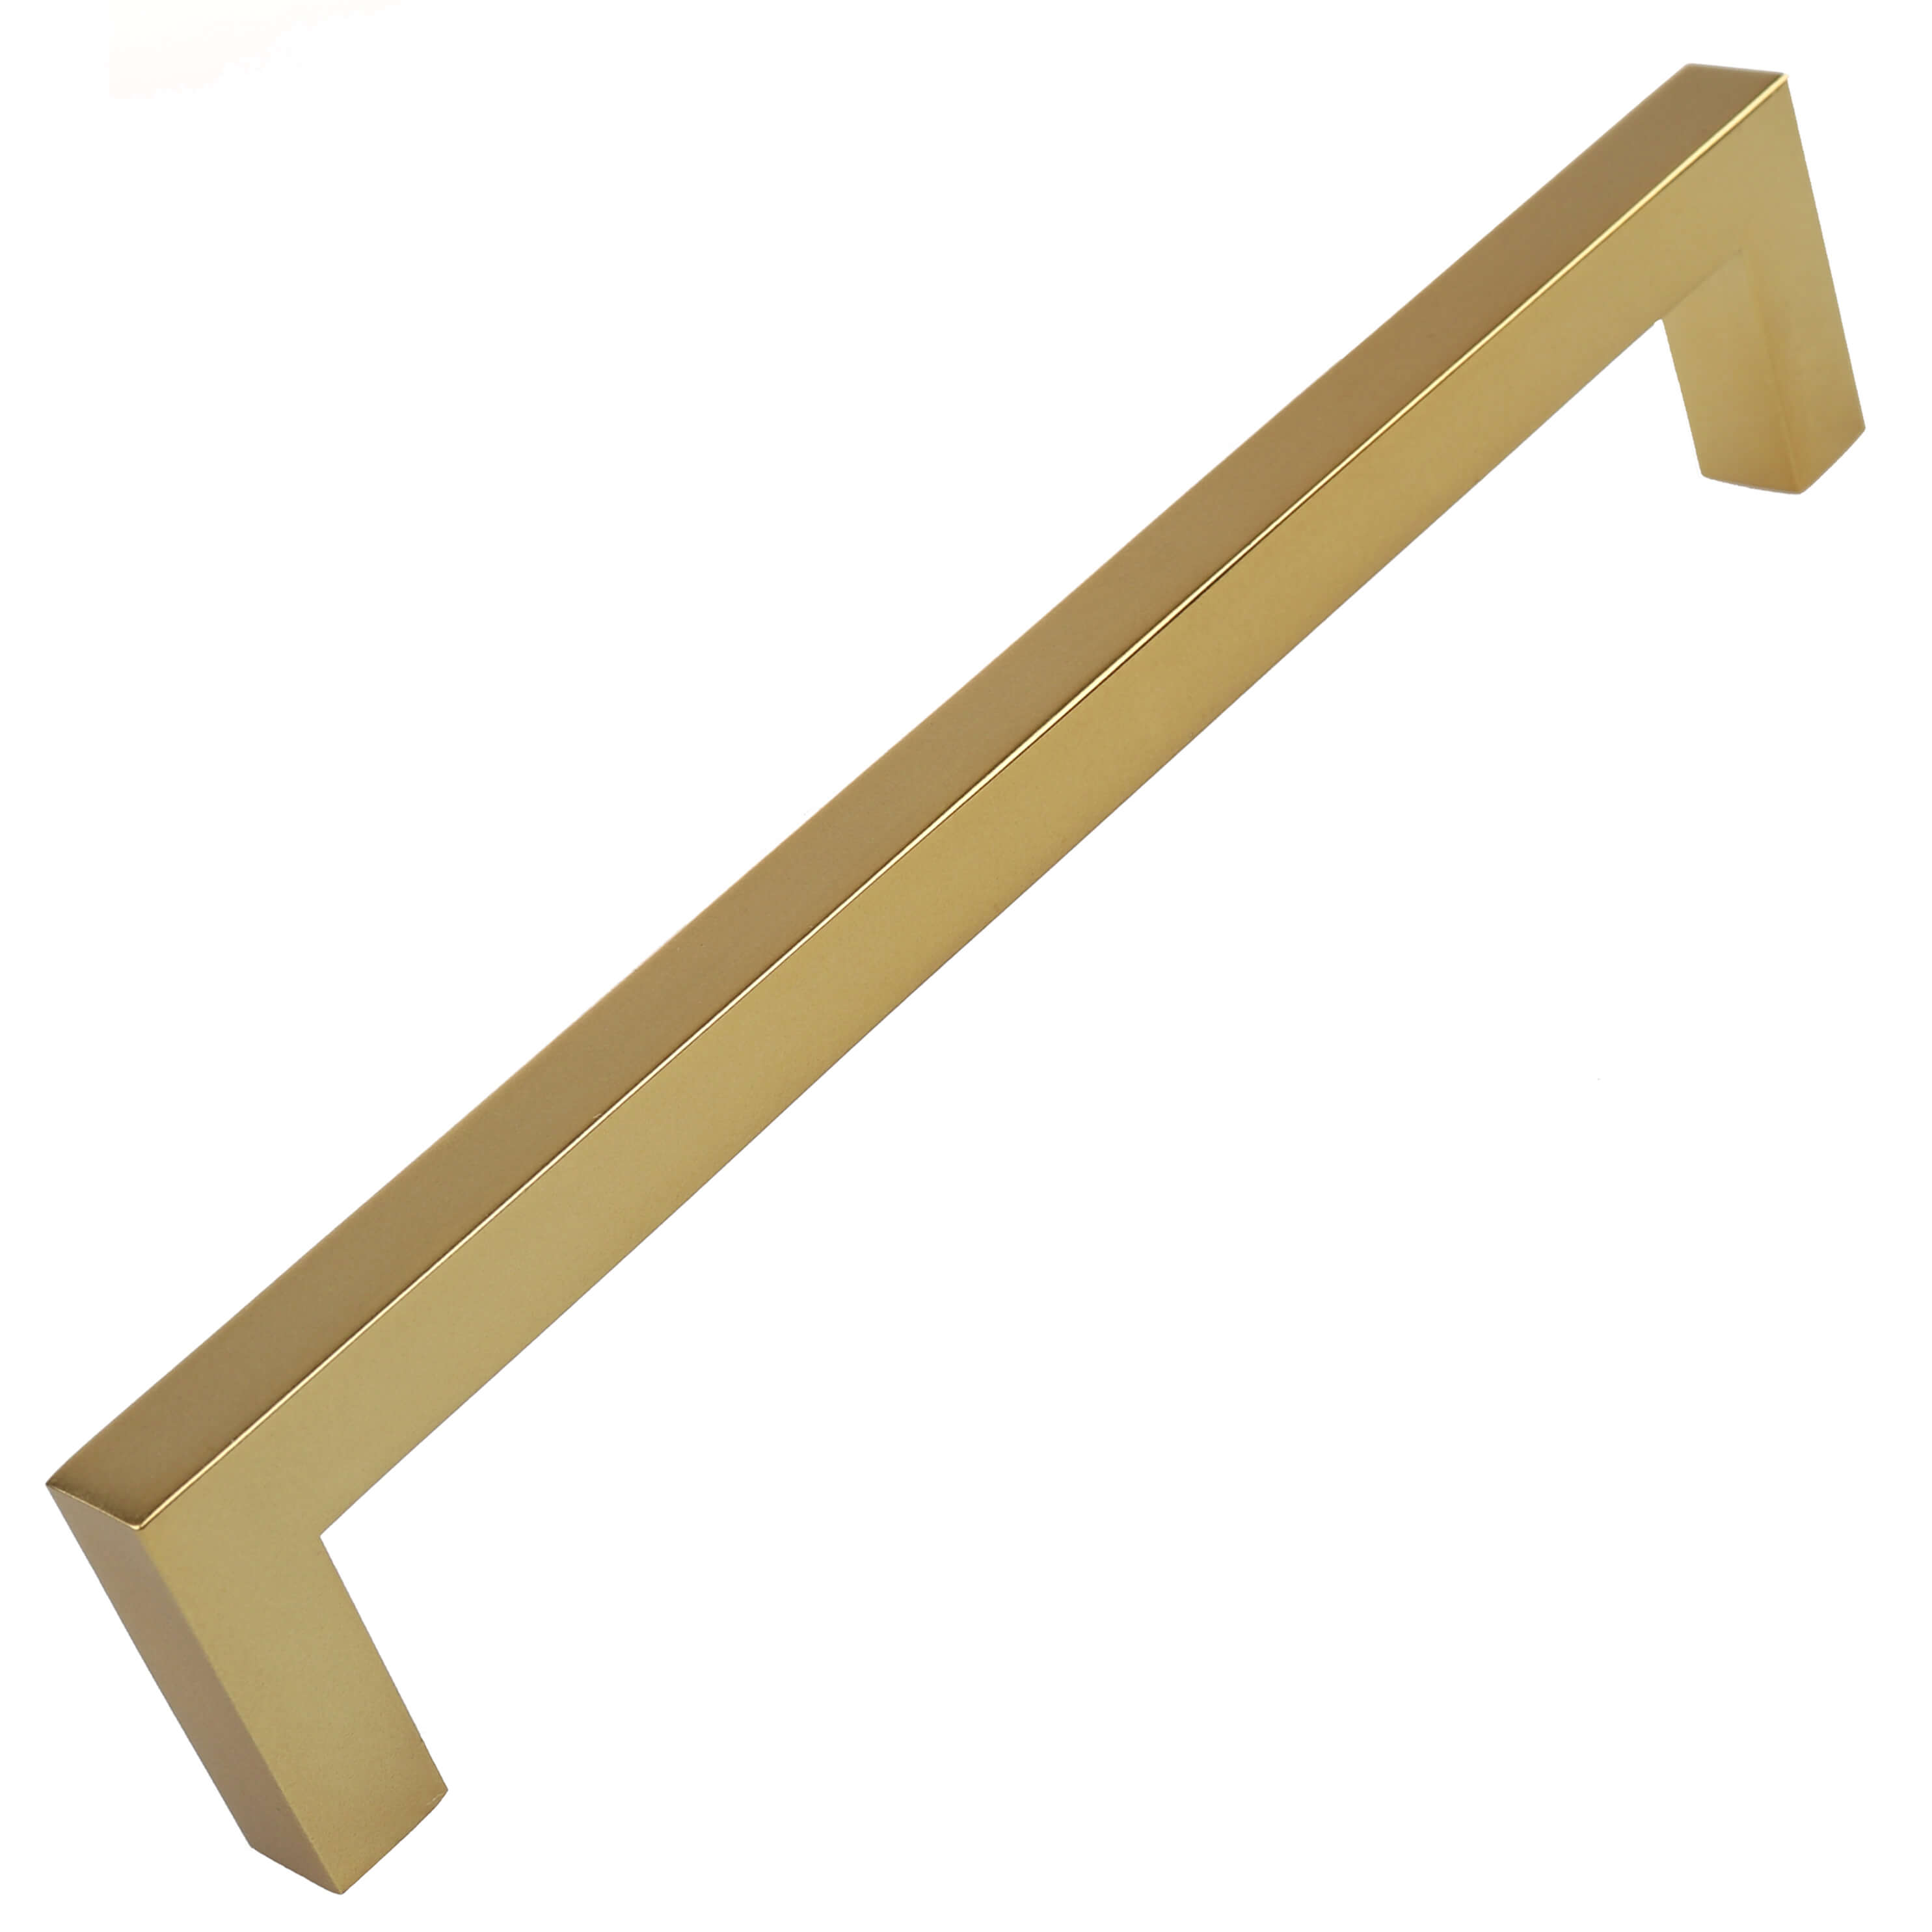 GlideRite 6-1/4 in. Center Solid Square Bar Cabinet Pulls, Brass Gold, Pack of 25 - image 1 of 3